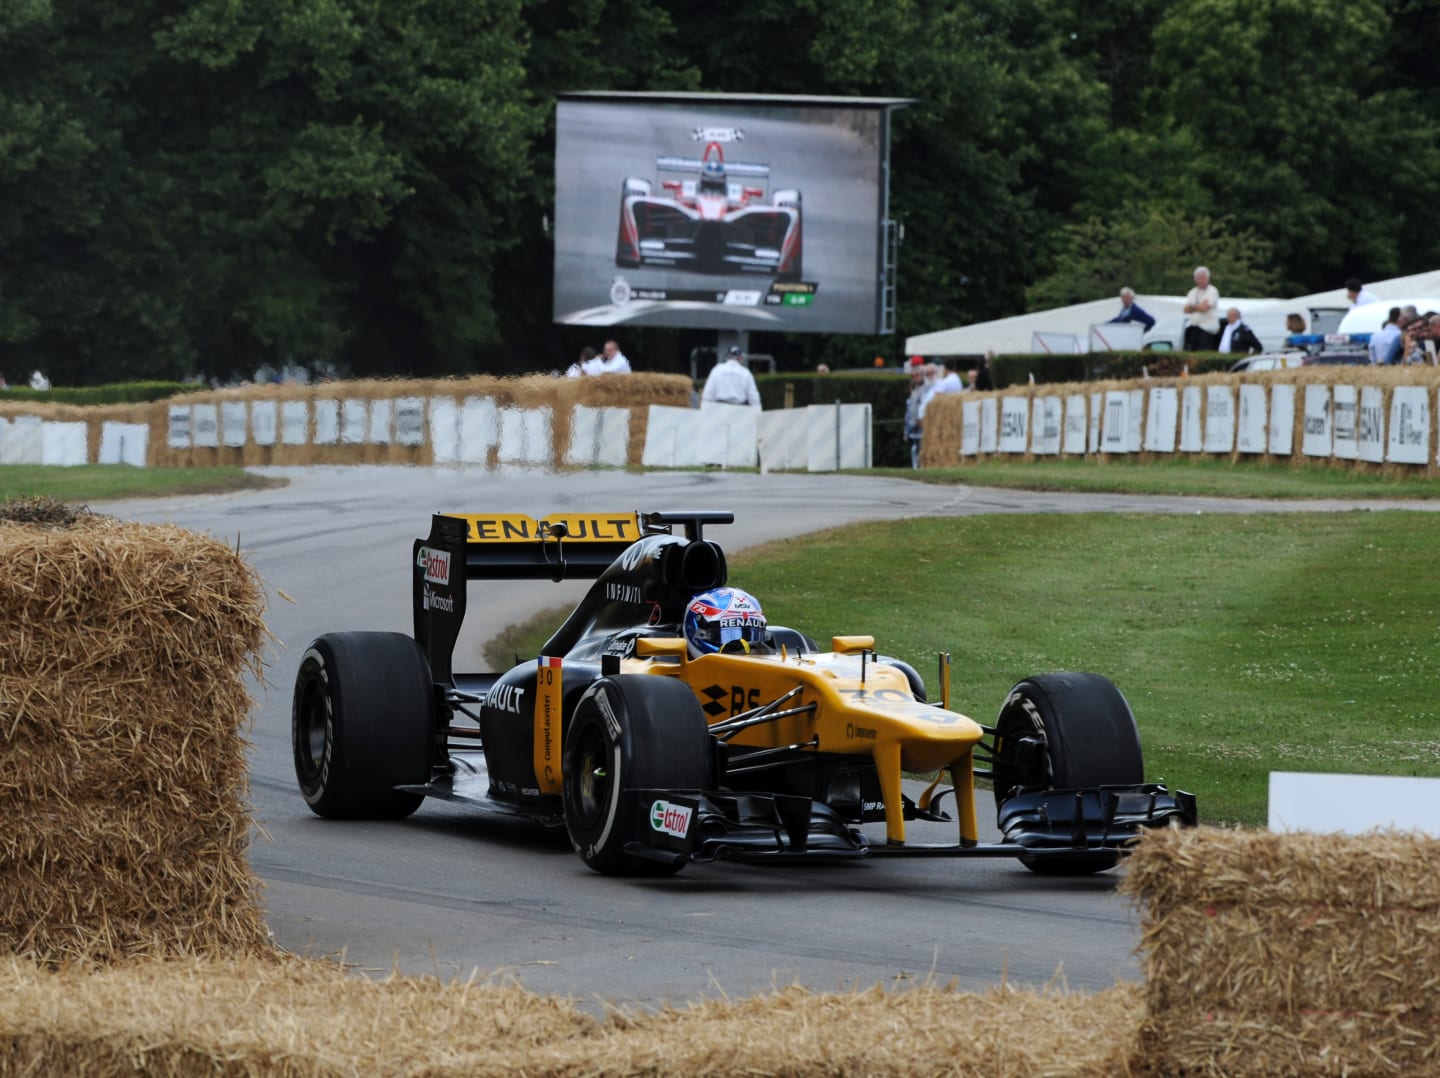 www.sutton-images.com Jolyon Palmer (GBR) Renault at Goodwood Festival of Speed, Goodwood, England, 30 June - 2 July 2017. © Sutton Images